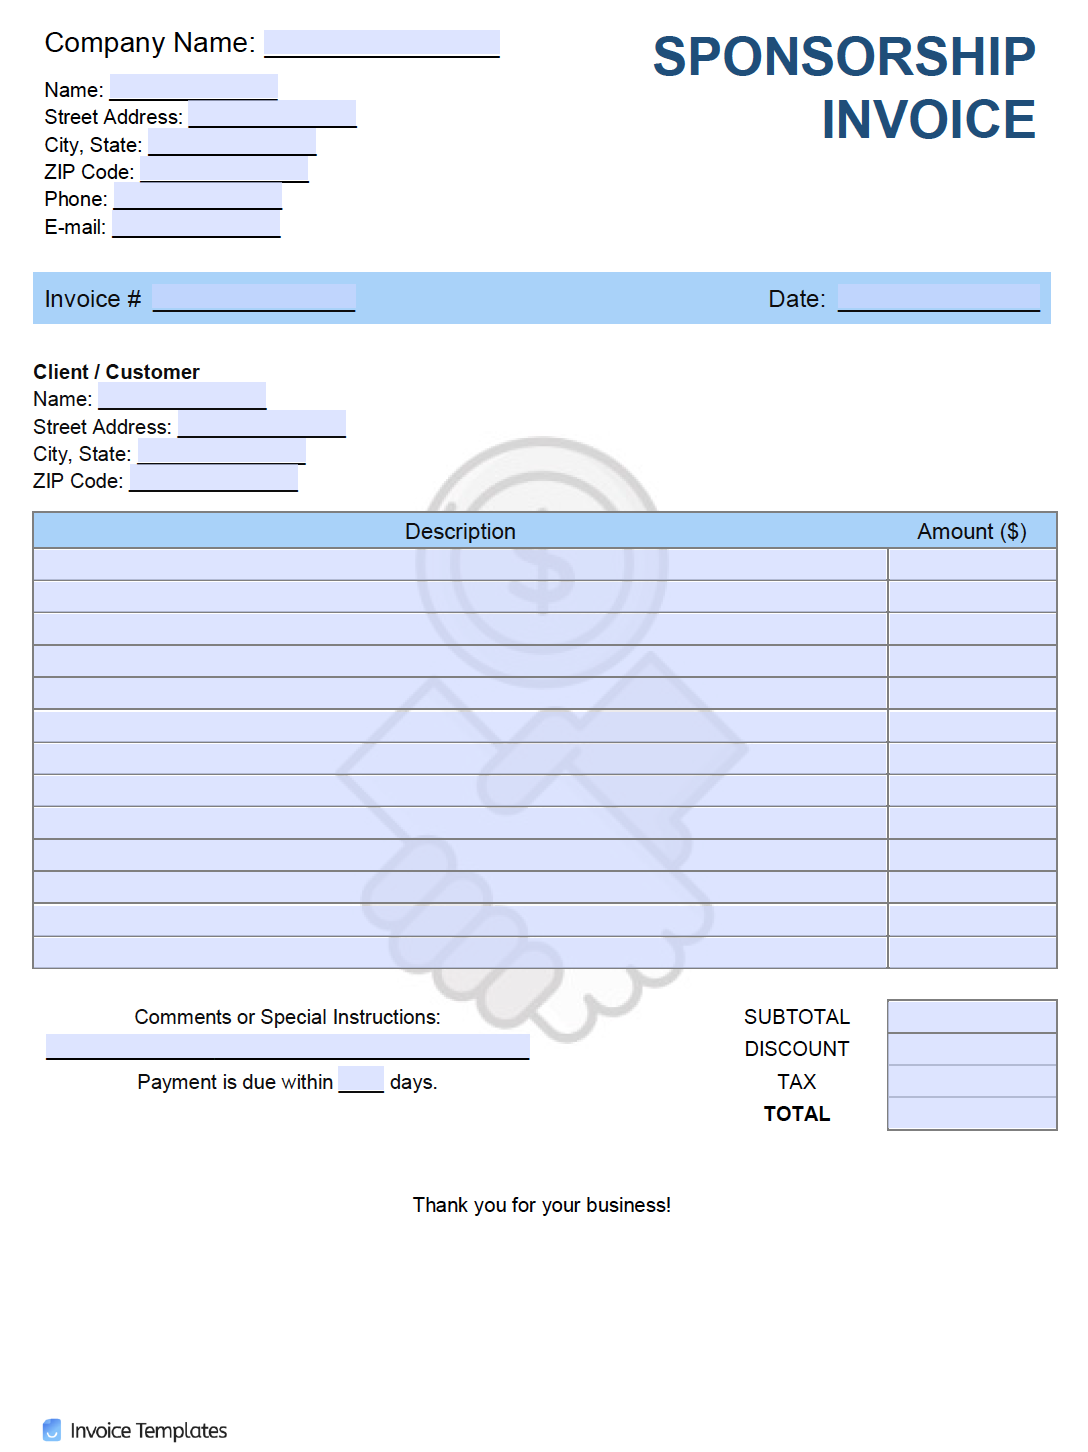 Free Sponsorship Invoice Template  PDF  WORD  EXCEL Throughout Blank Sponsor Form Template Free